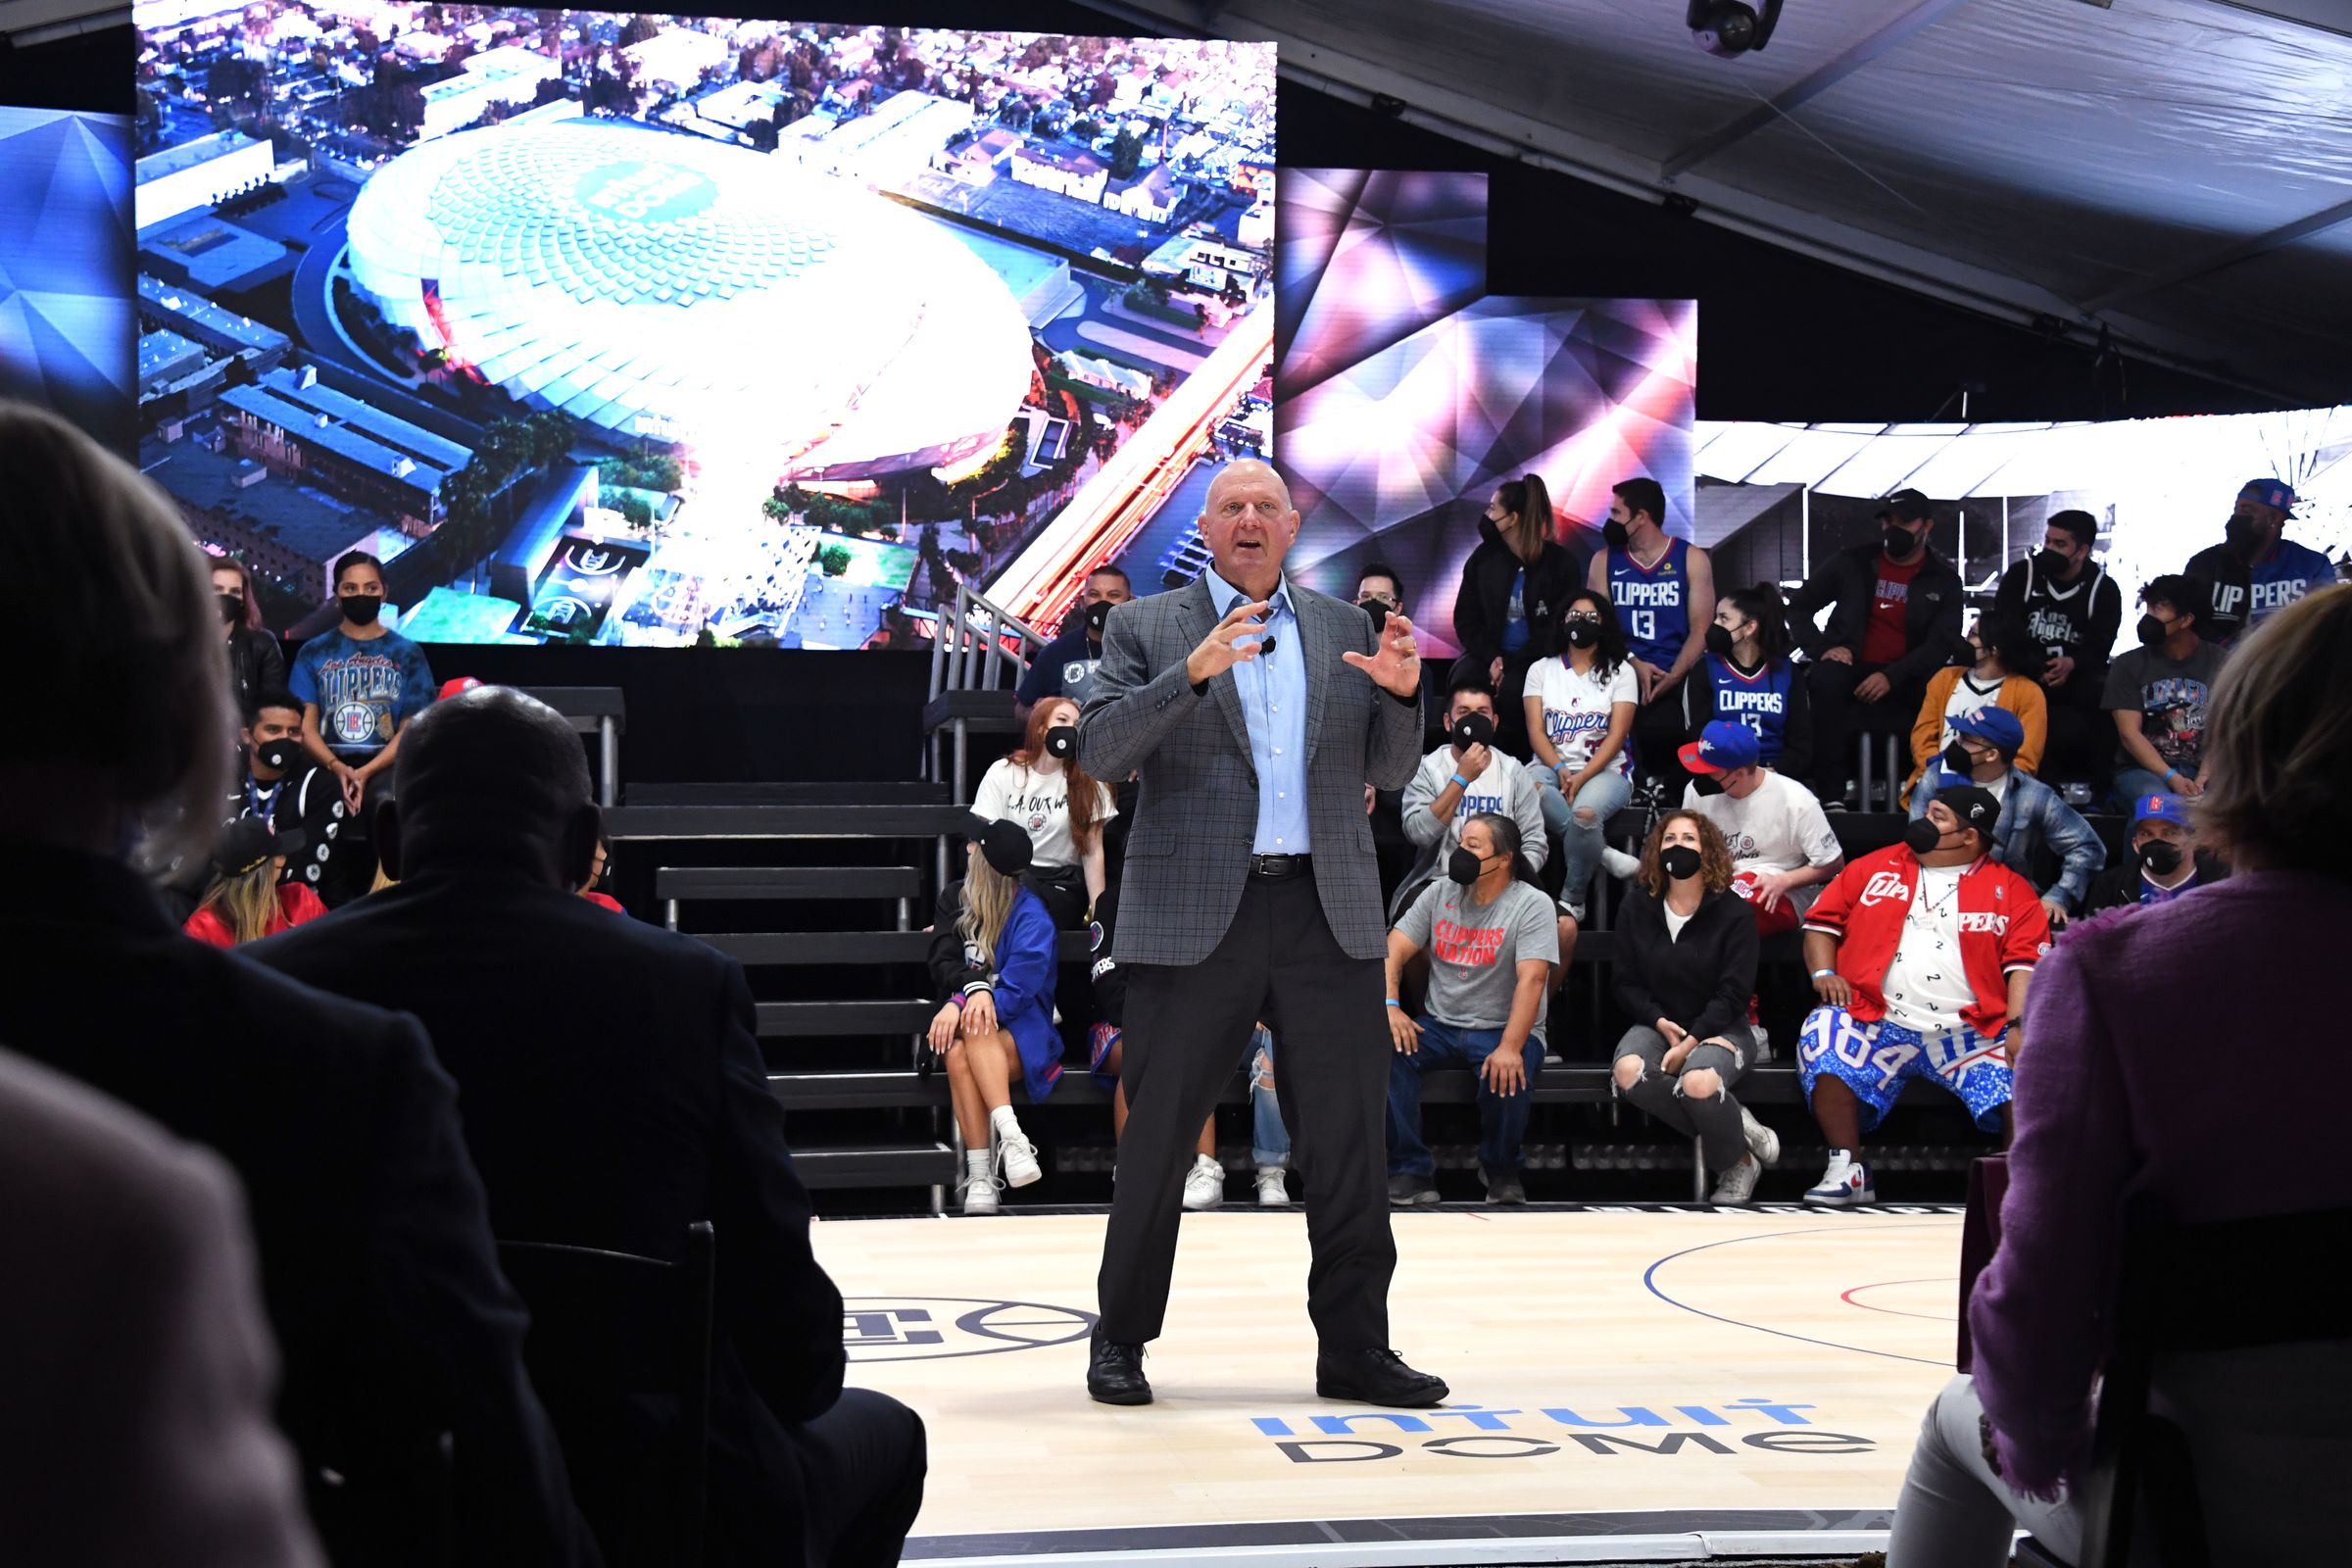 LA Clippers Break Ground on Intuit Dome